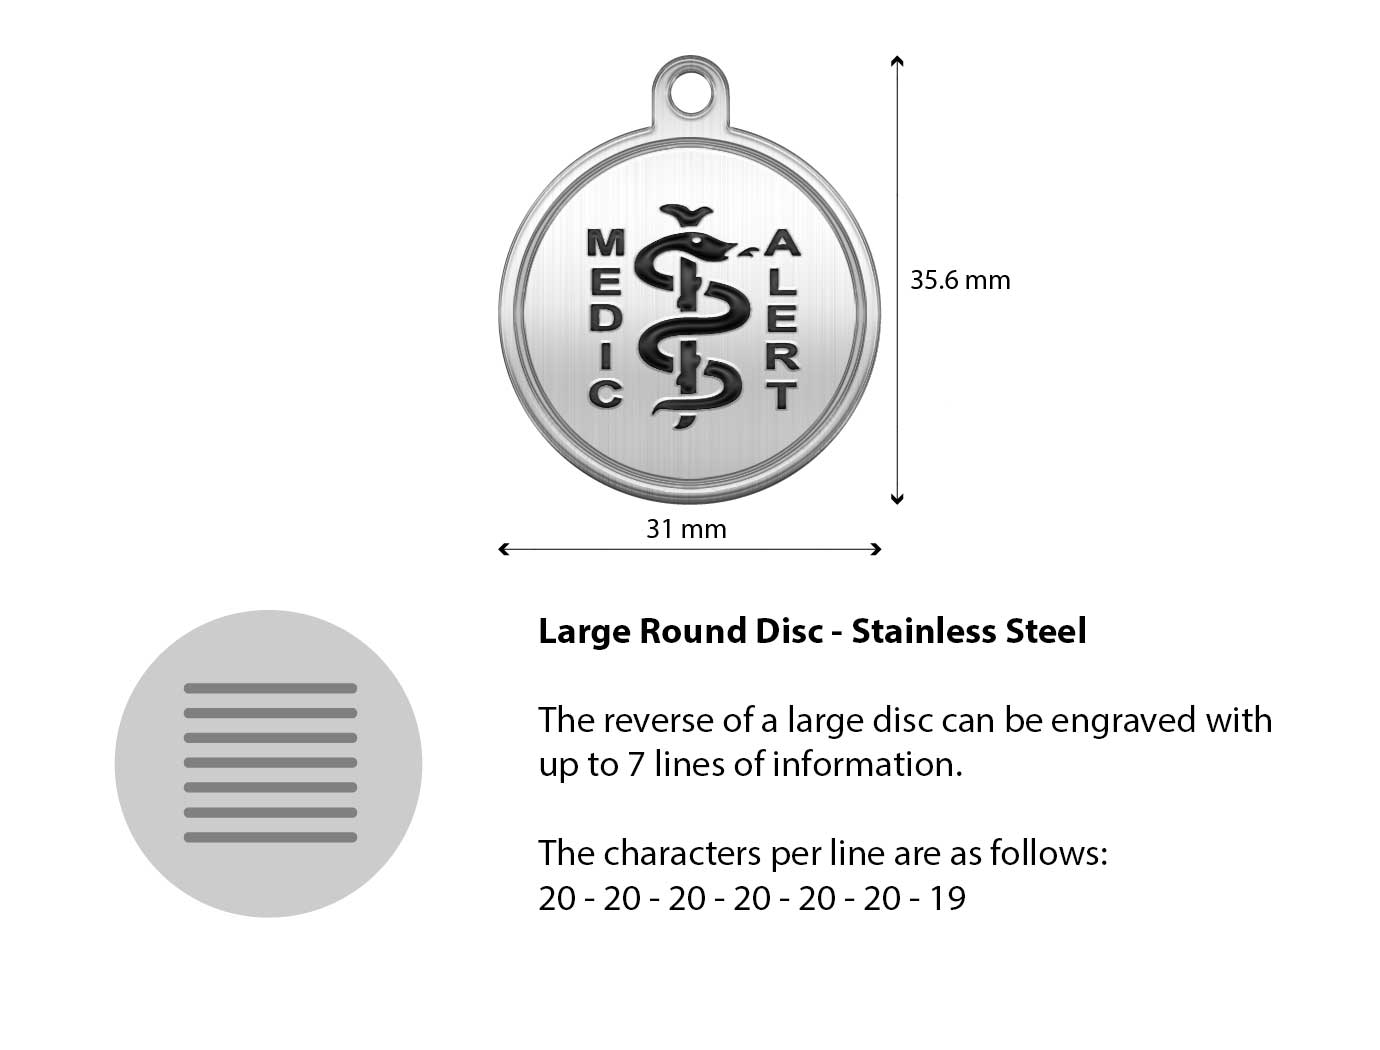 Diagram of the MedicAlert stainless steel large round disc with measurements and descriptions of the engraving specifications